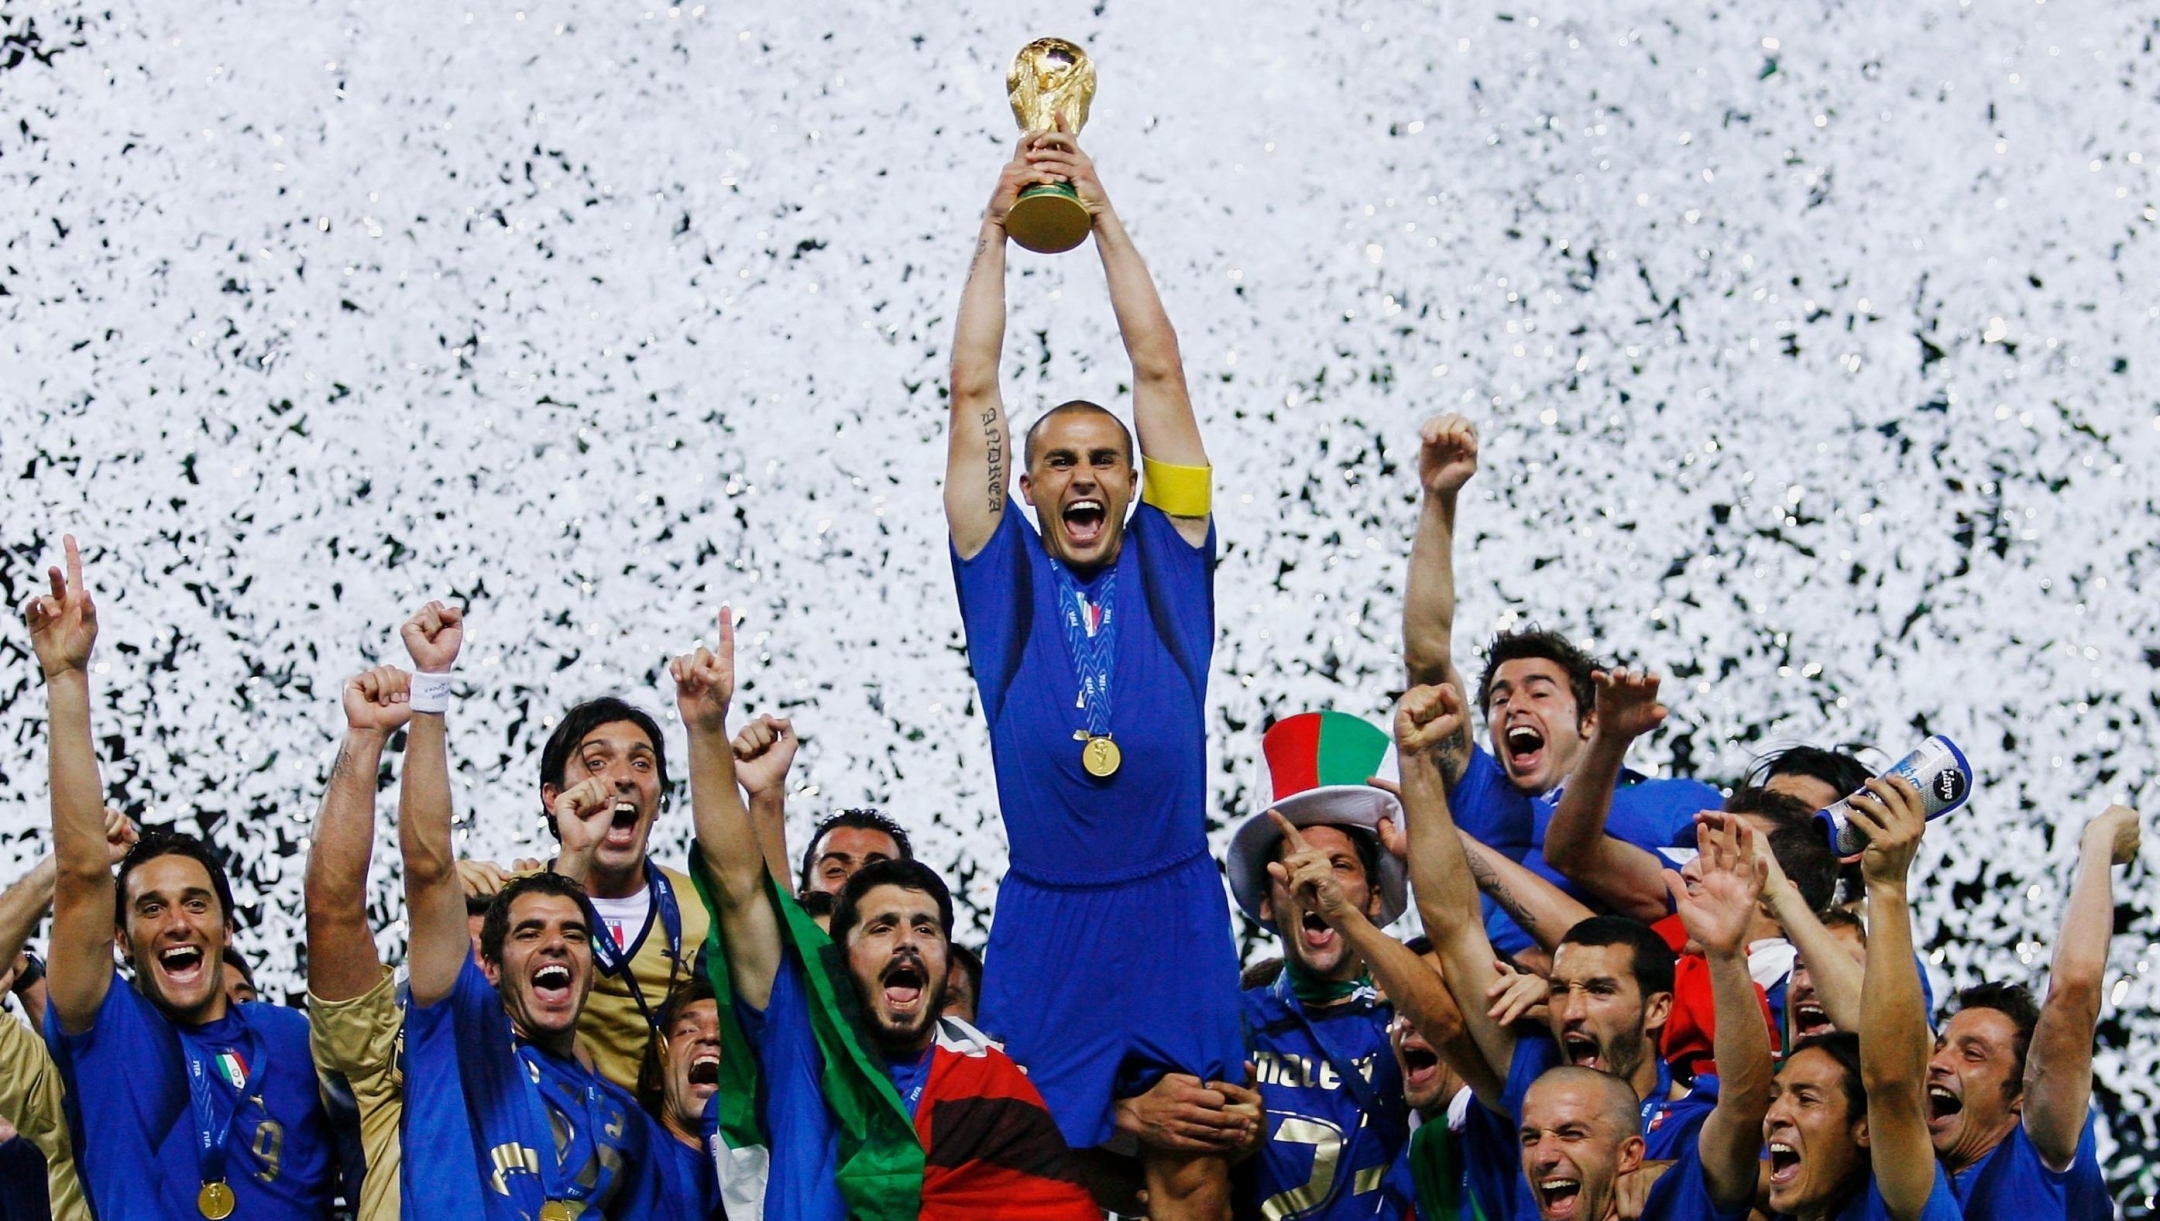 BERLIN - JULY 09:  The Italian players celebrate as Fabio Cannavaro of Italy lifts the World Cup trophy aloft following victory in a penalty shootout at the end of the FIFA World Cup Germany 2006 Final match between Italy and France at the Olympic Stadium on July 9, 2006 in Berlin, Germany.  (Photo by Shaun Botterill/Getty Images)